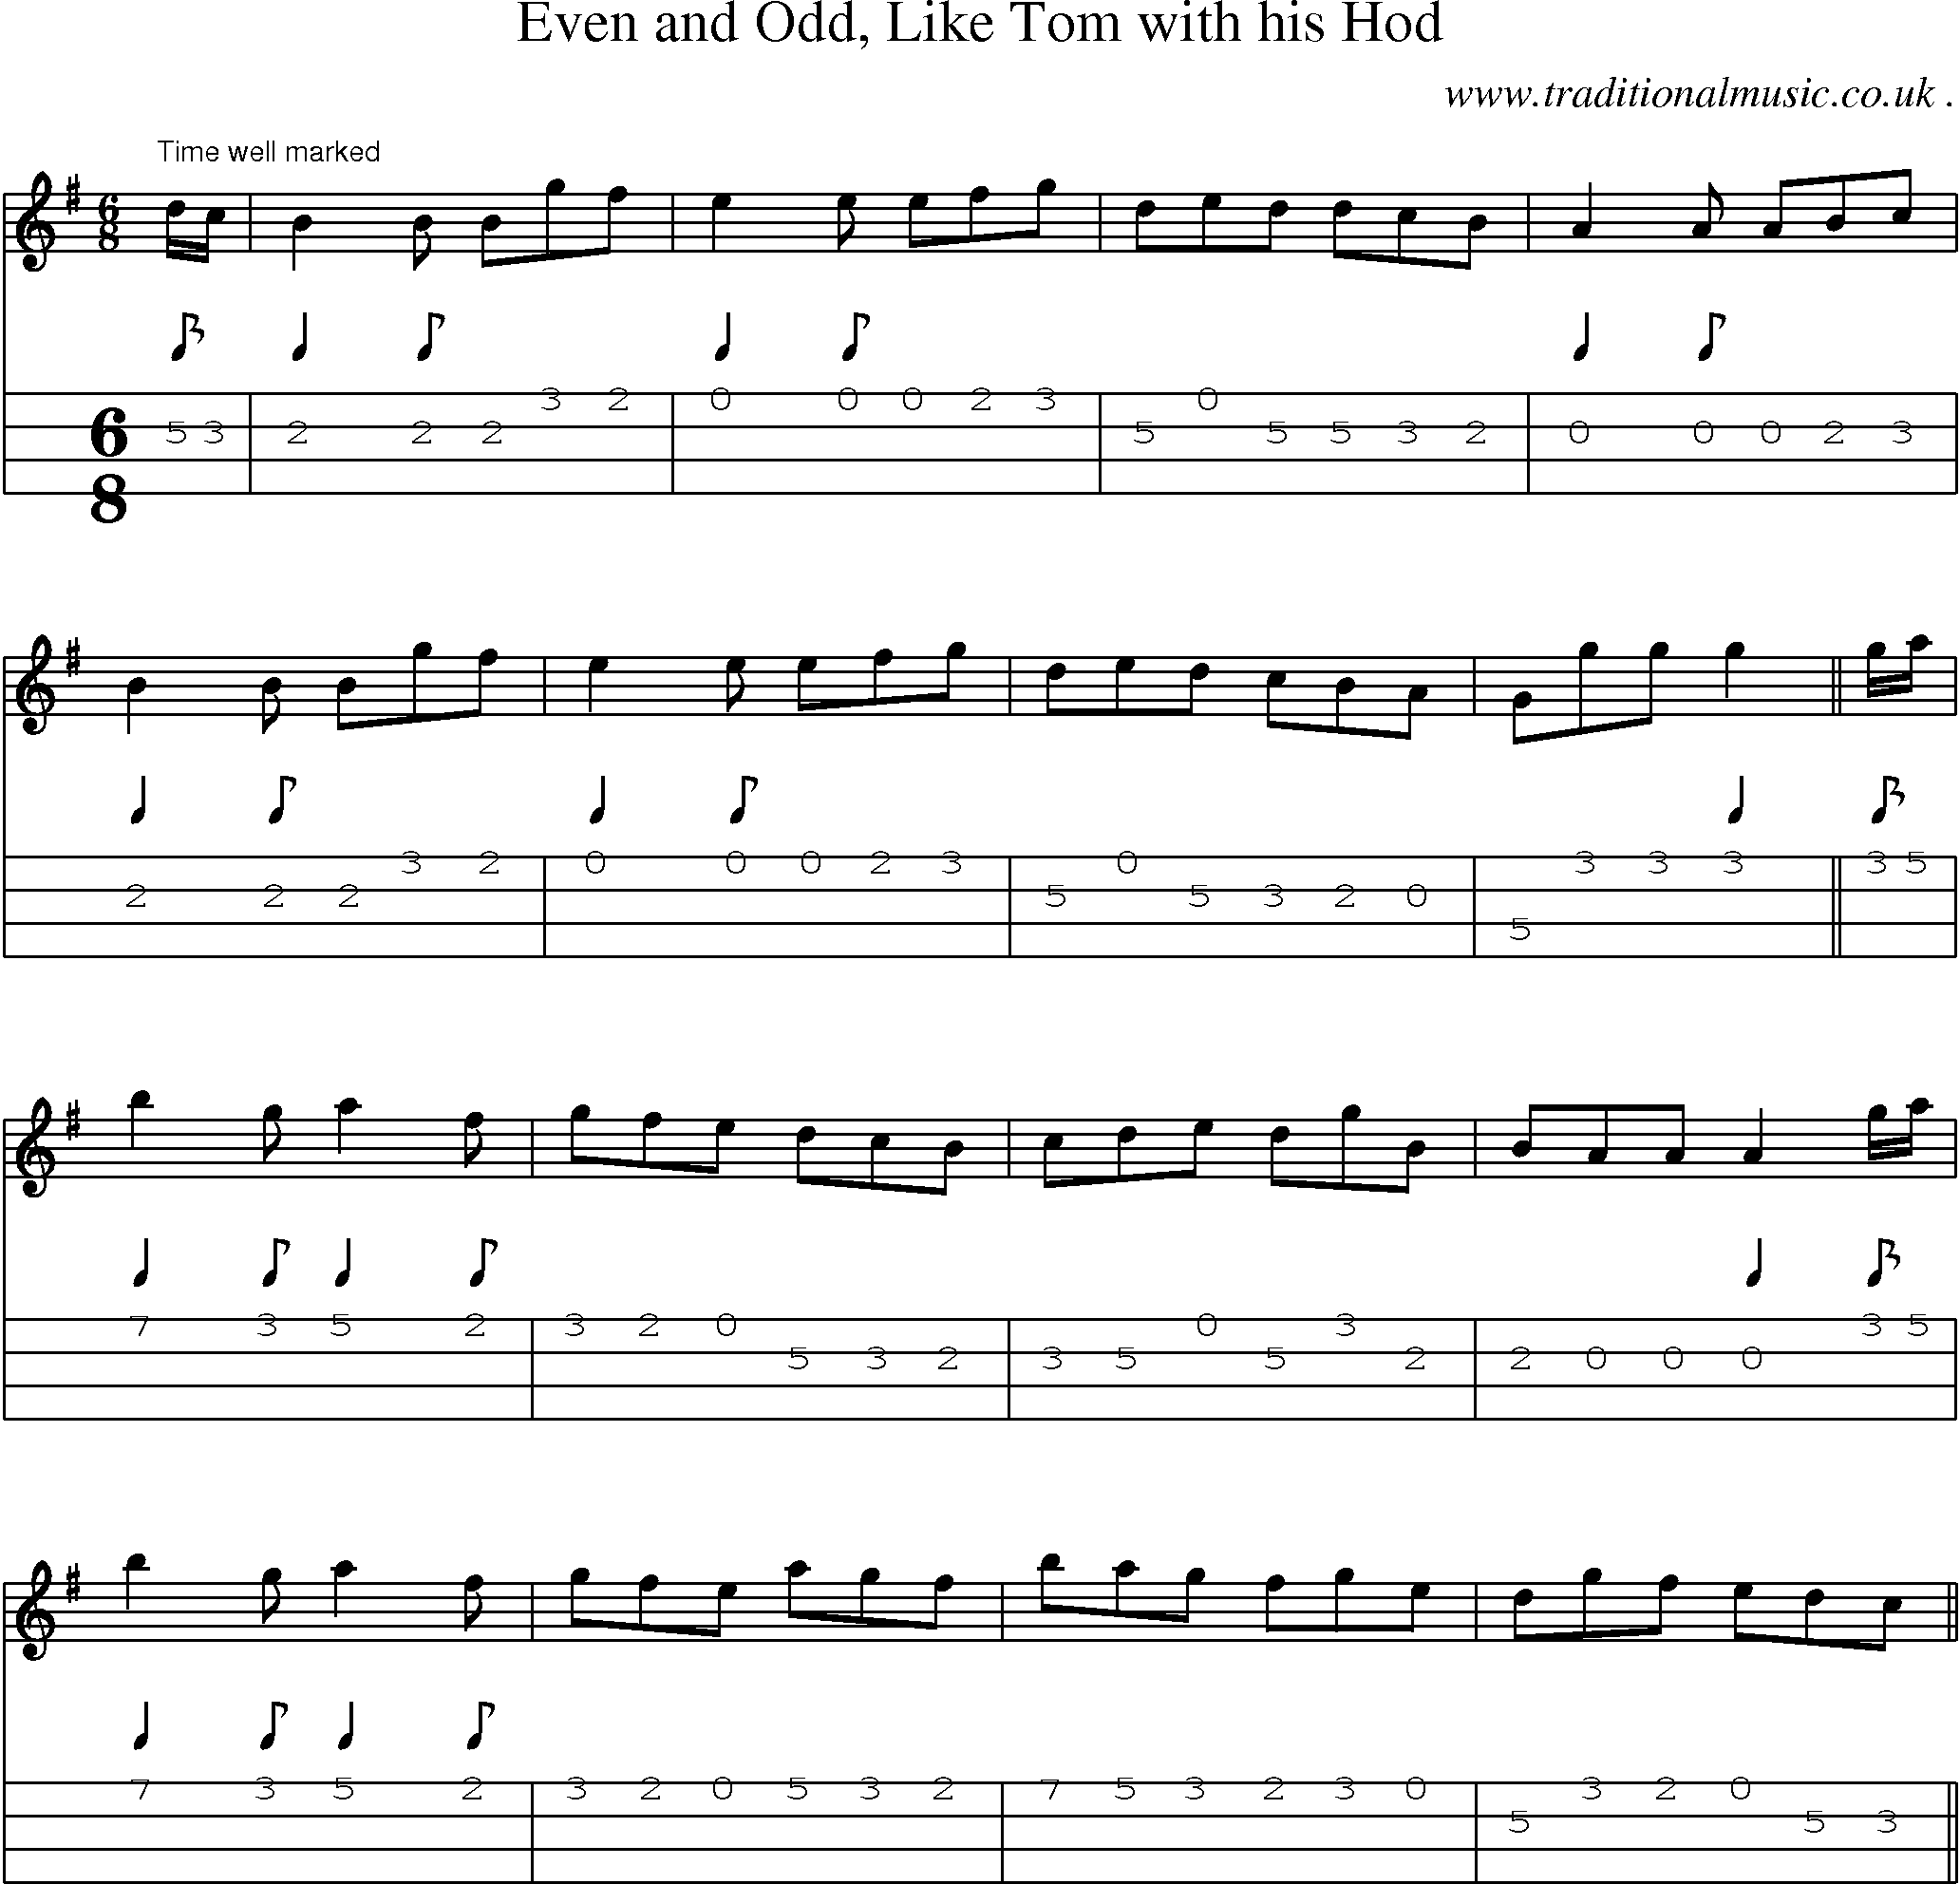 Sheet-Music and Mandolin Tabs for Even And Odd Like Tom With His Hod